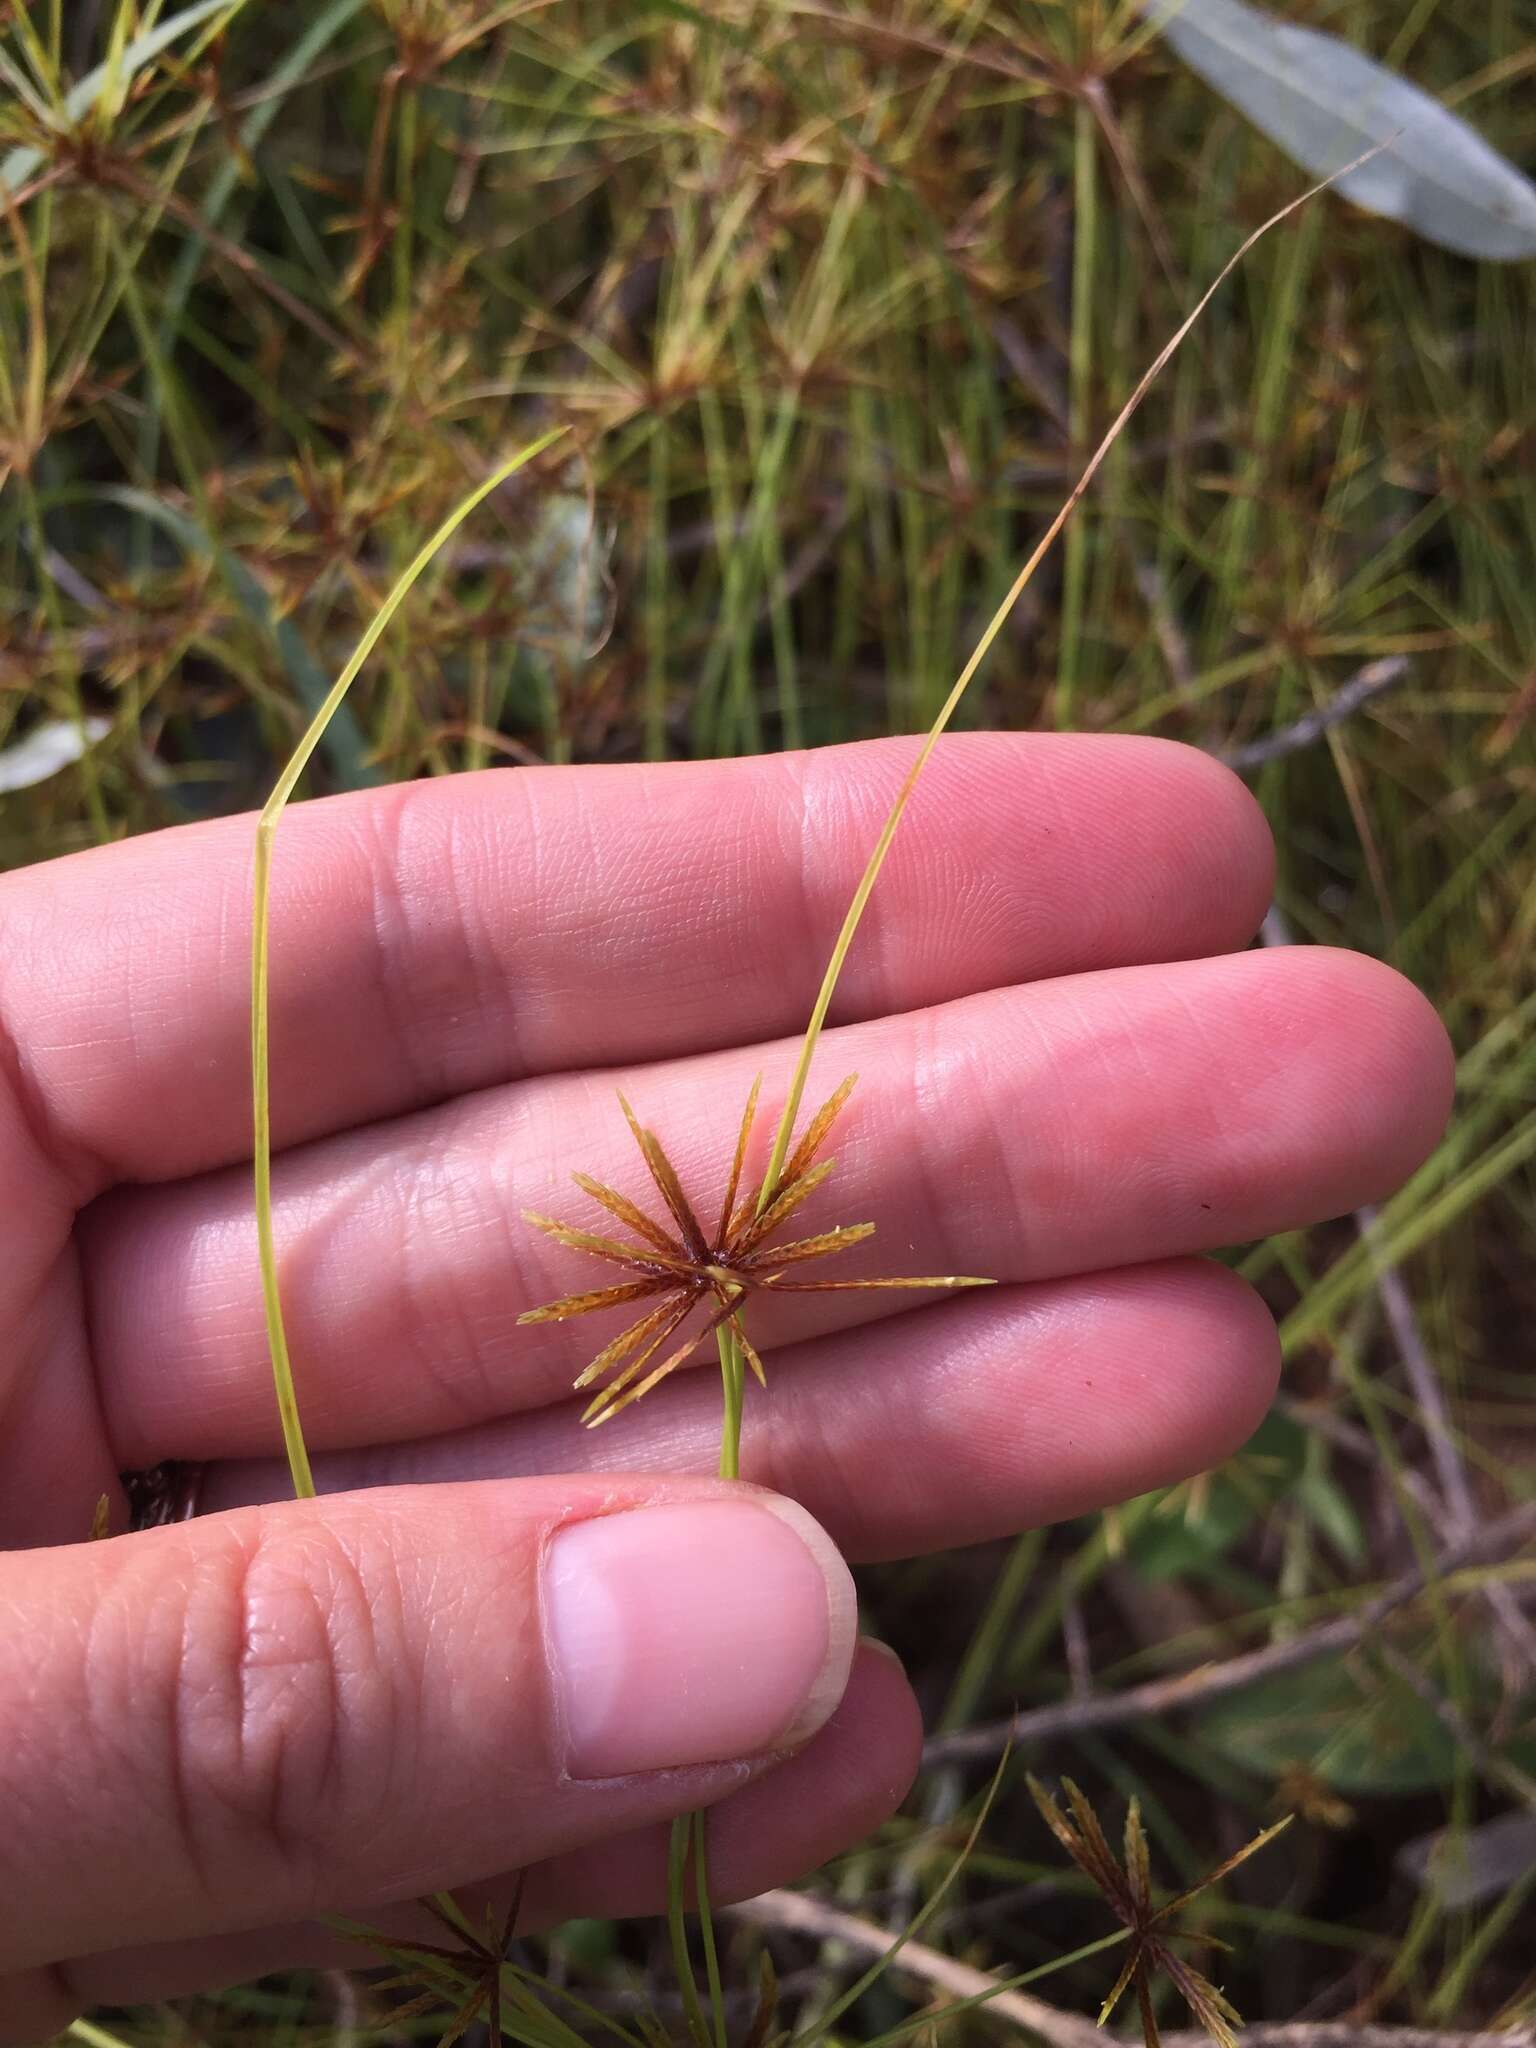 Image of Foothill Flat Sedge